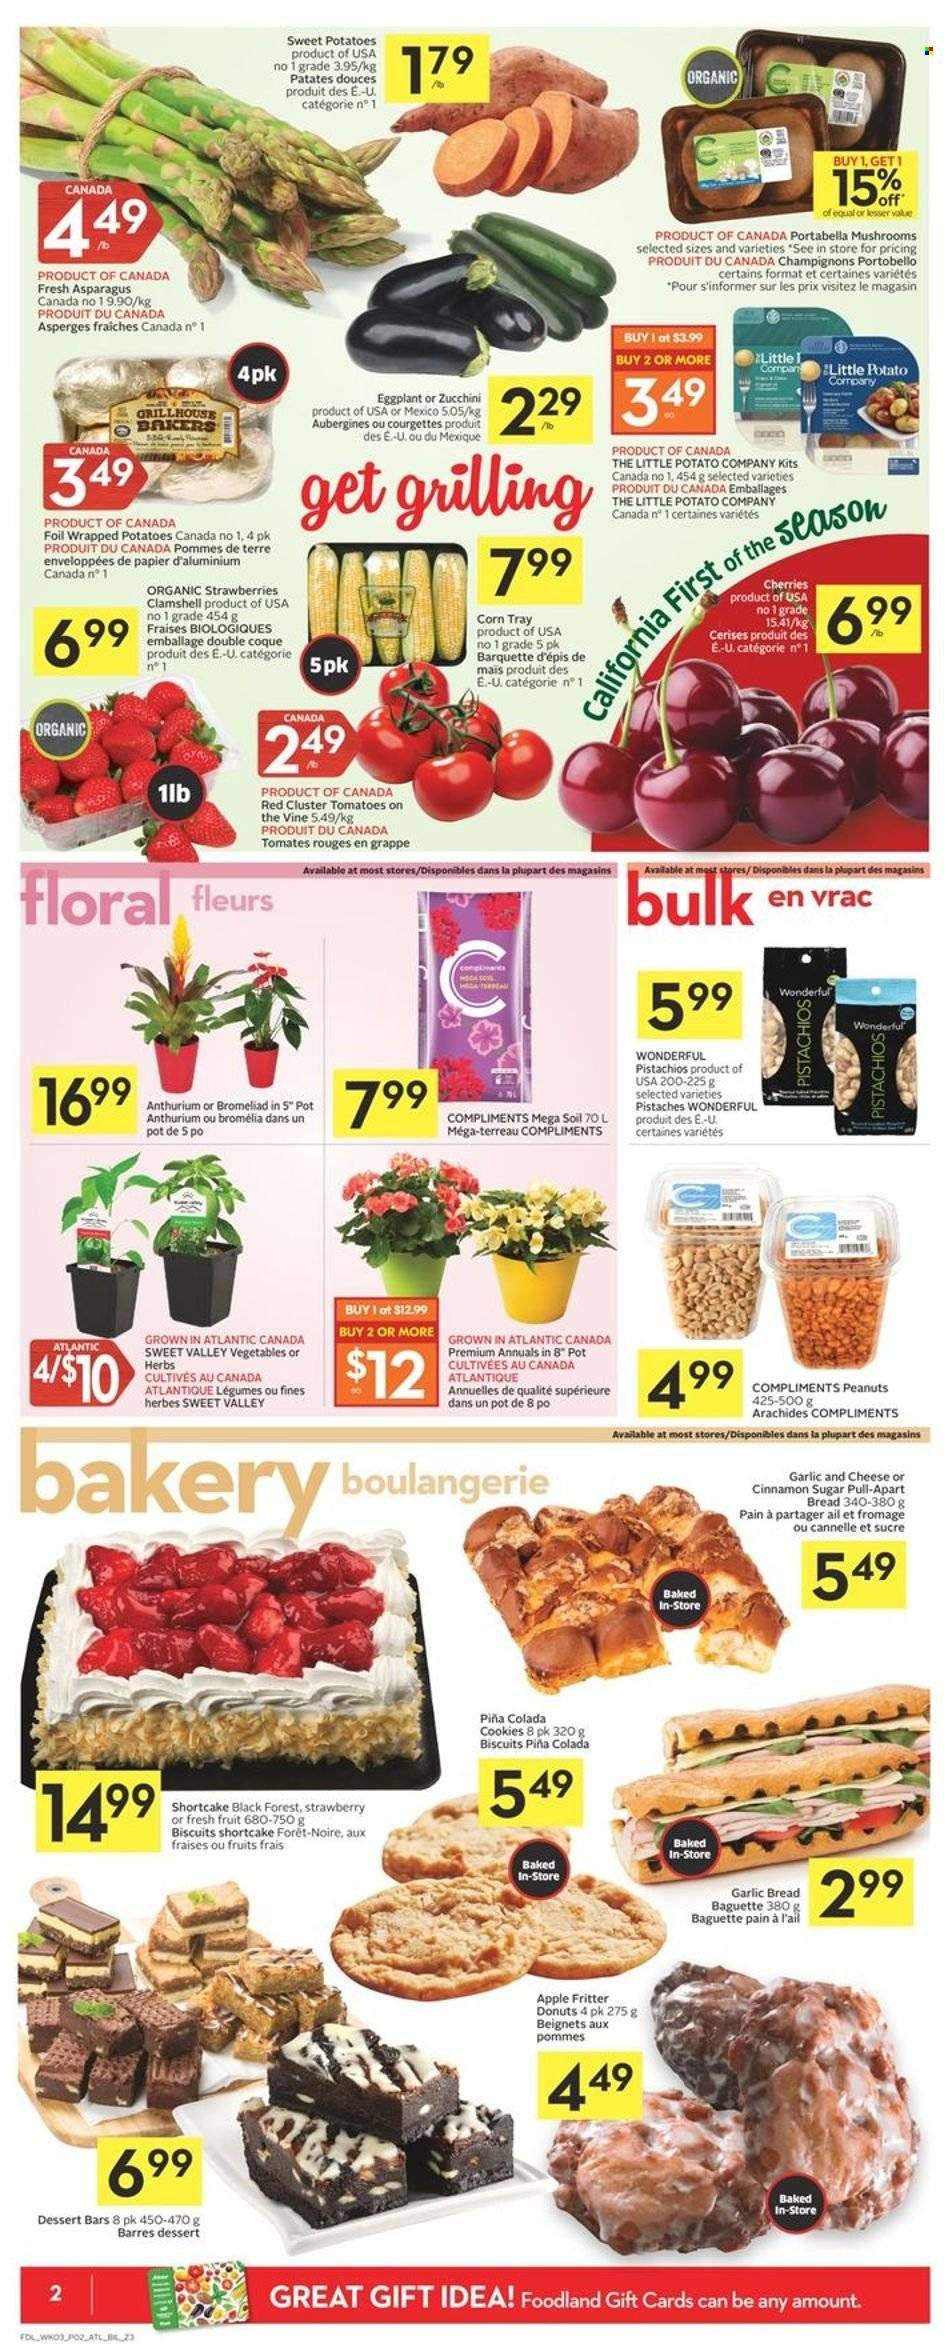 thumbnail - Co-op Flyer - May 19, 2022 - May 25, 2022 - Sales products - portobello mushrooms, mushrooms, bread, donut, asparagus, corn, sweet potato, tomatoes, zucchini, potatoes, eggplant, strawberries, cookies, biscuit, sugar, cinnamon, peanuts, pistachios, baguette. Page 2.